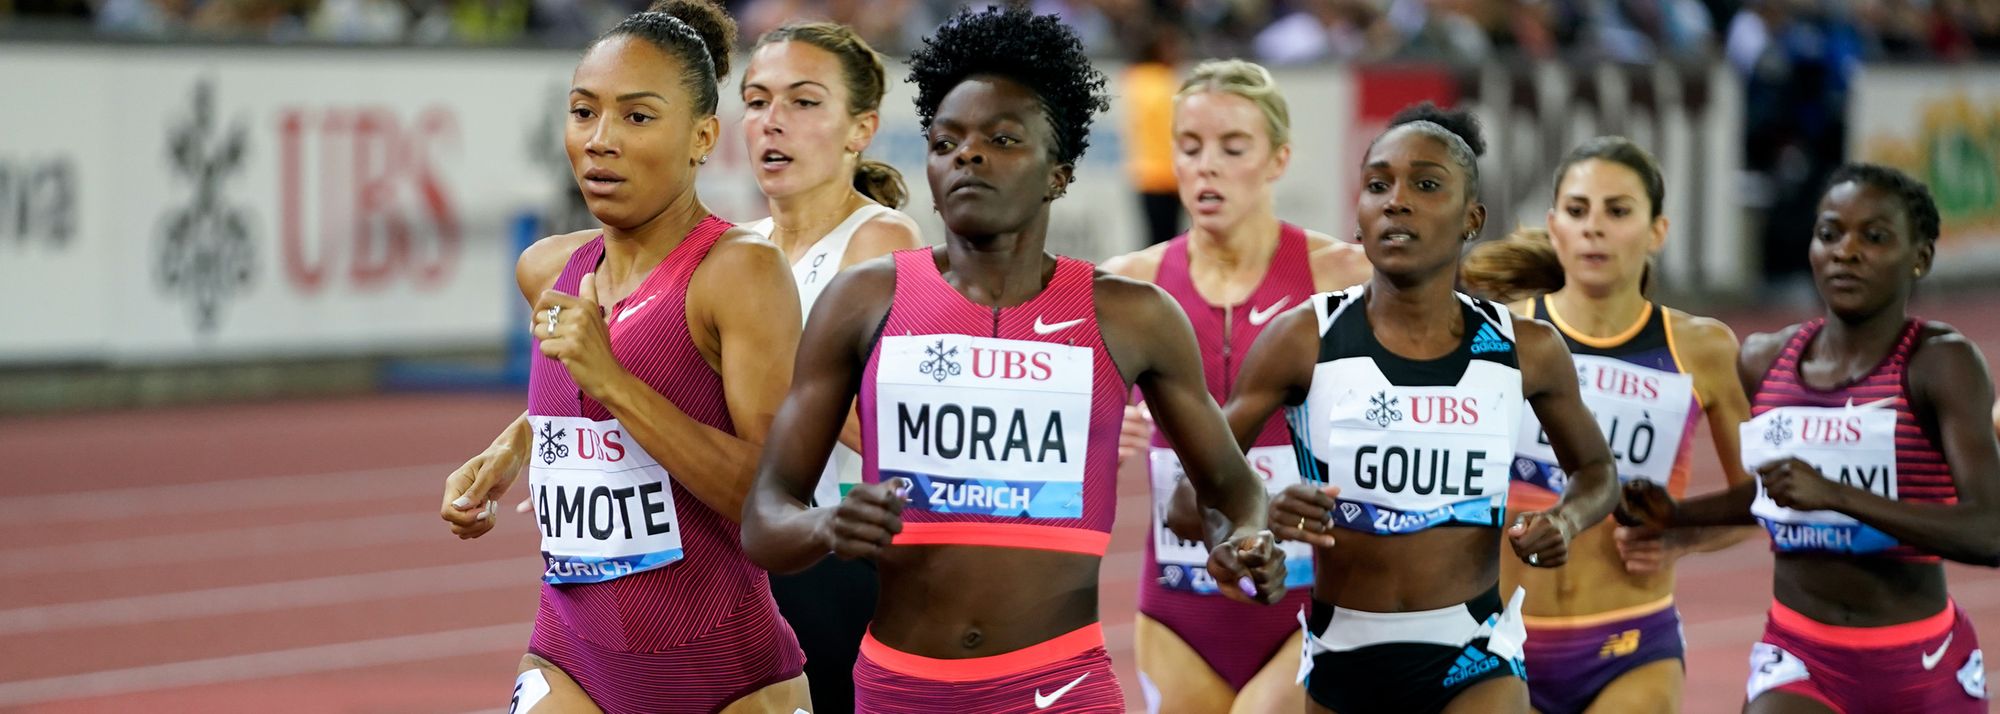 The Doha Meeting welcomes many of the world’s best athletes for the third Wanda Diamond League event of the year on Friday